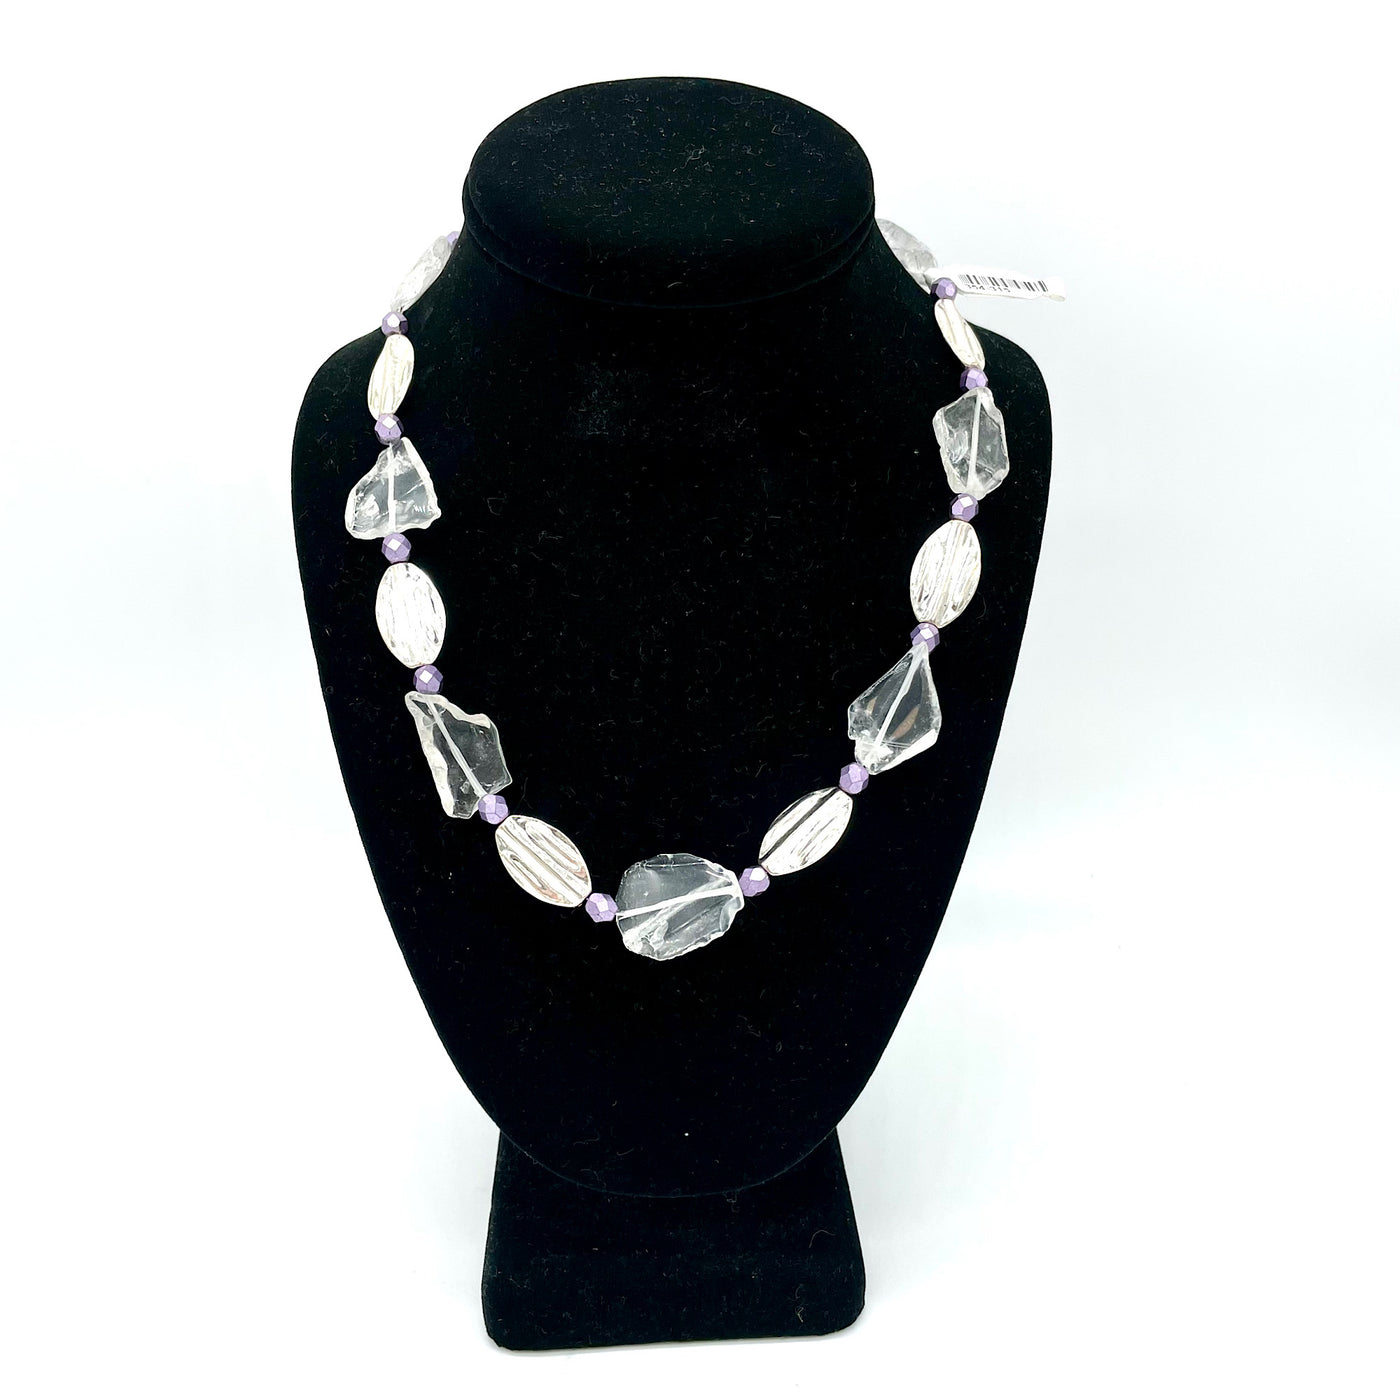 Handcrafted Necklace with Silver, Quartz and purple Beads